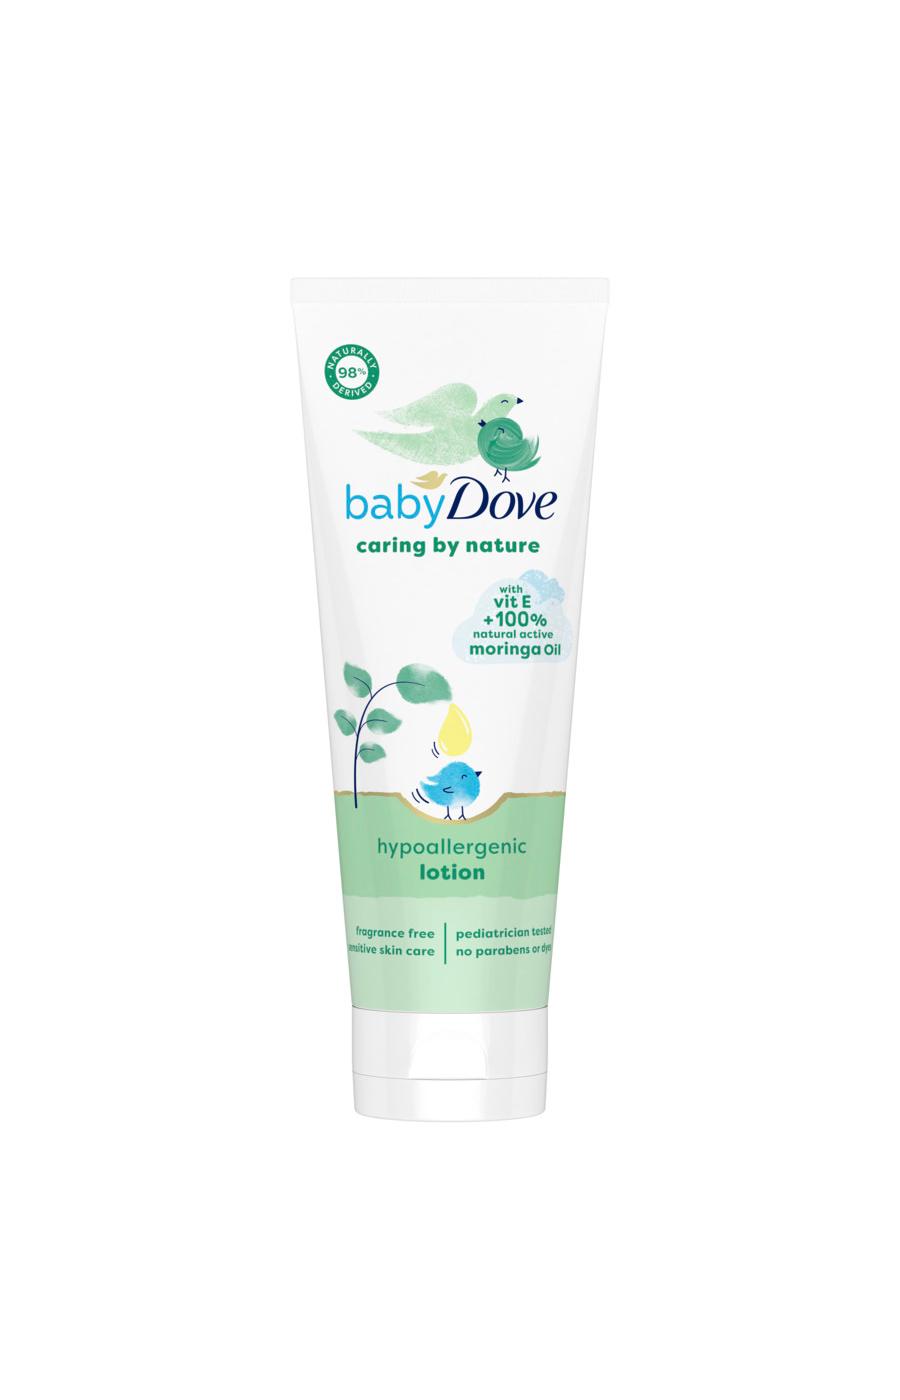 Baby Dove Hypoallergenic Lotion with Vitamin E and 100% Natural Moringa Oil; image 1 of 5